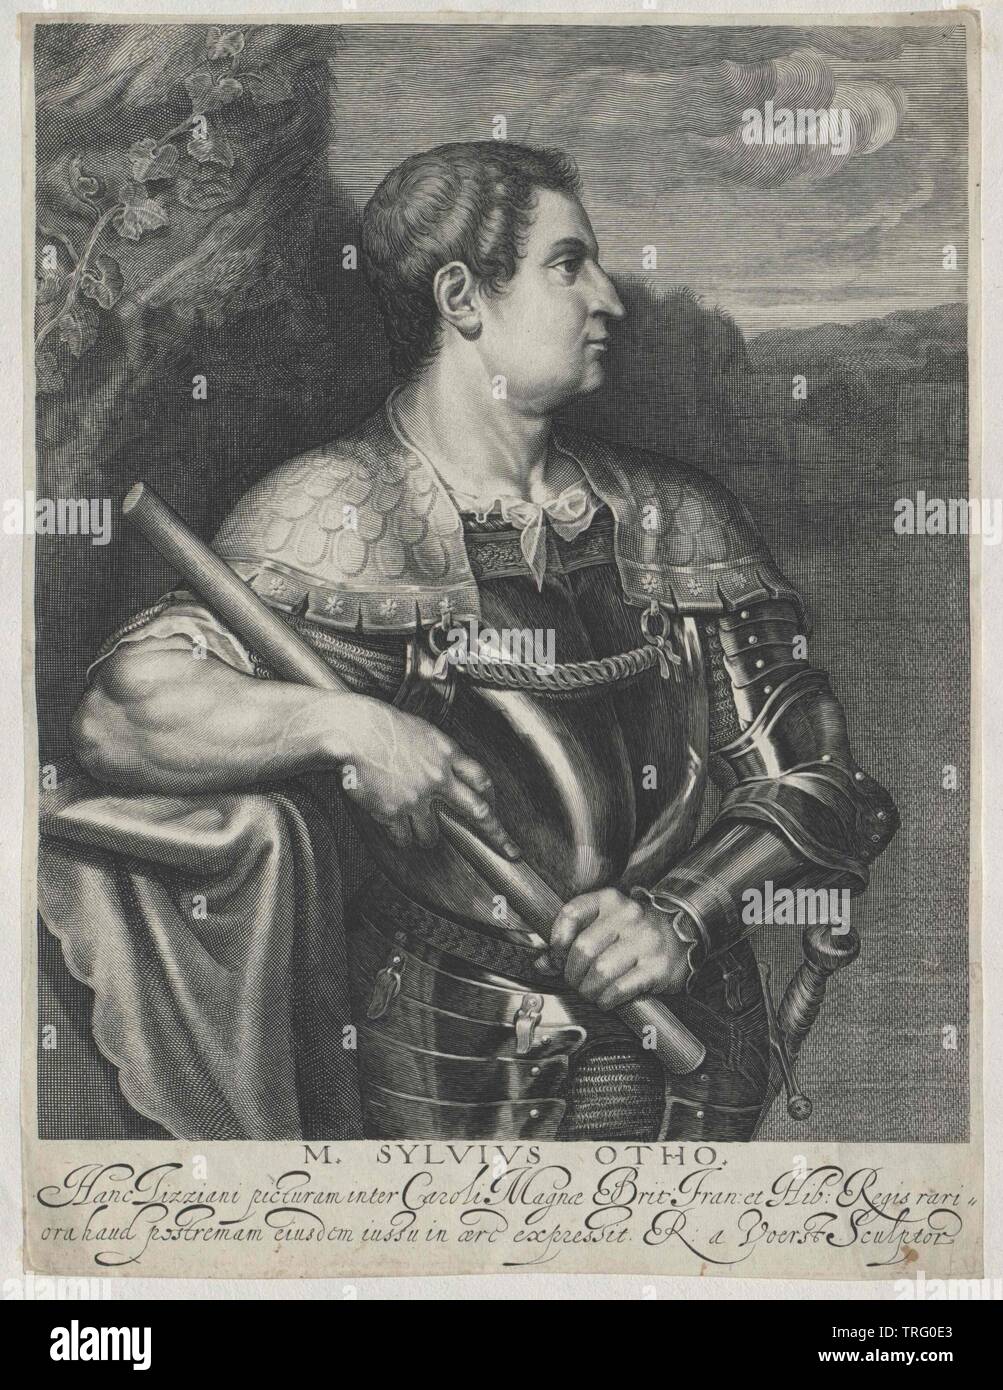 Otho, imperatore romano, Additional-Rights-Clearance-Info-Not-Available Foto Stock